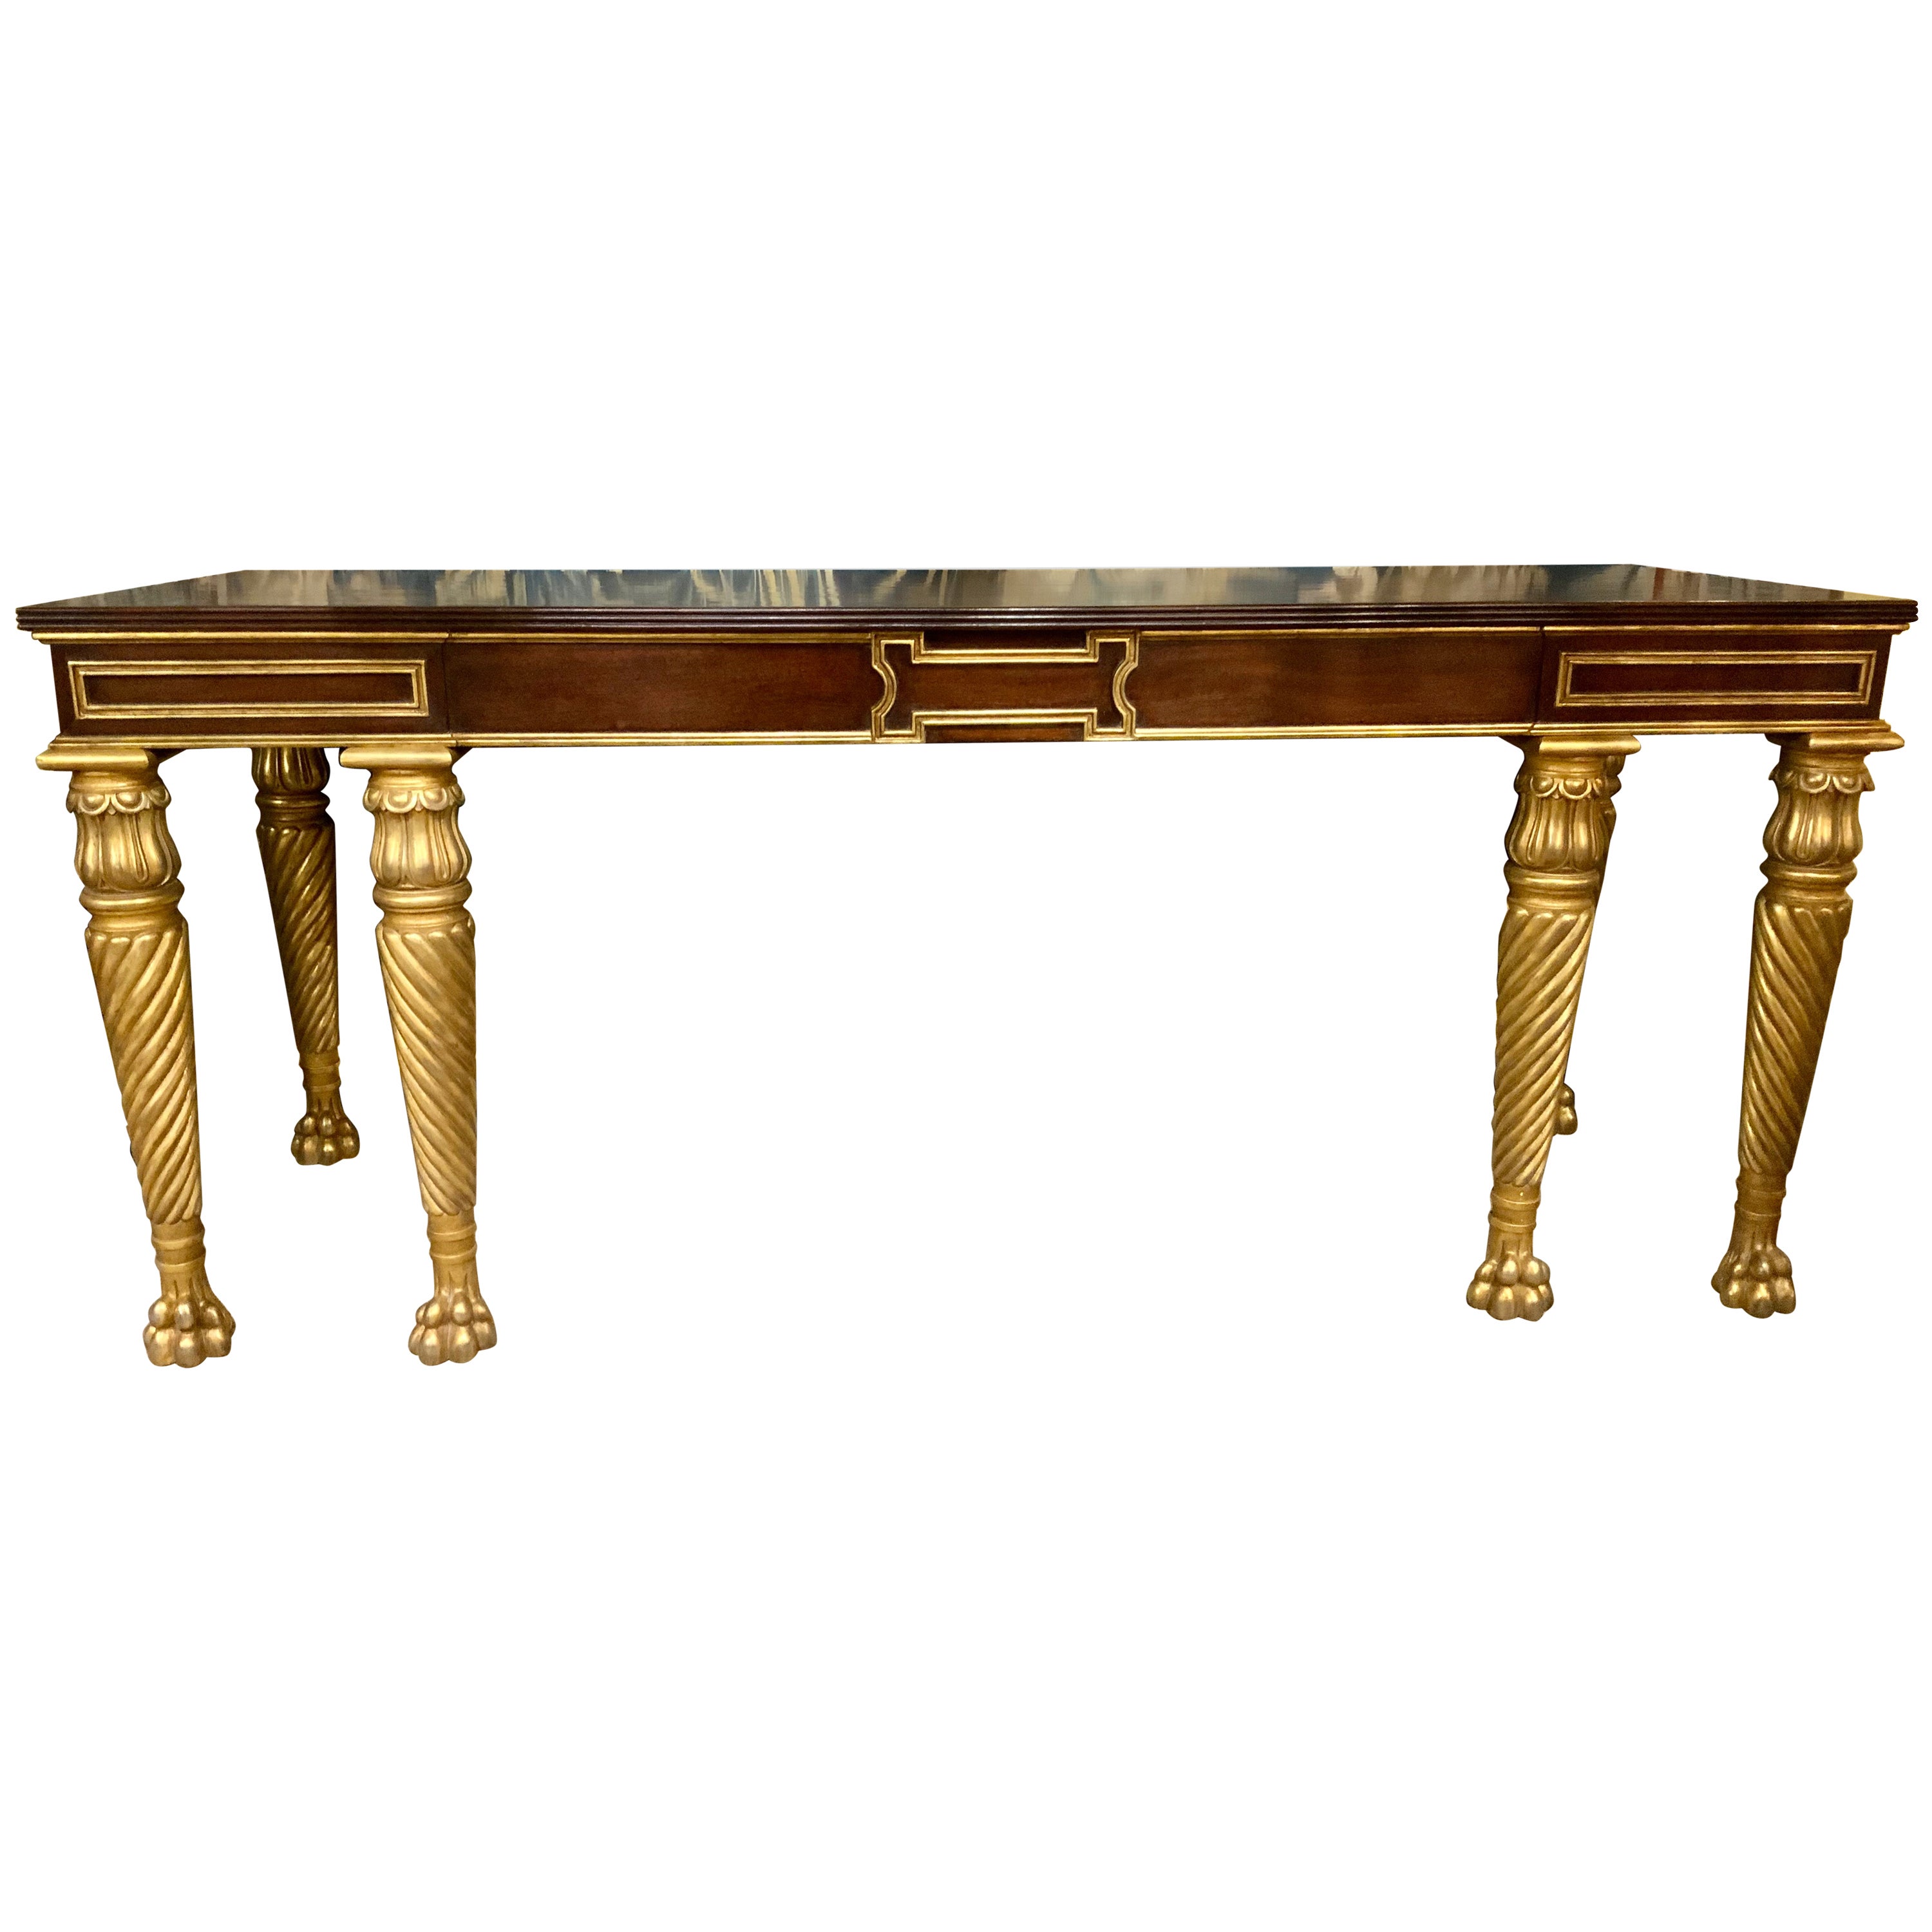 Mahogany Console with Gilt Carved Legs and Designs in Neoclassical Taste